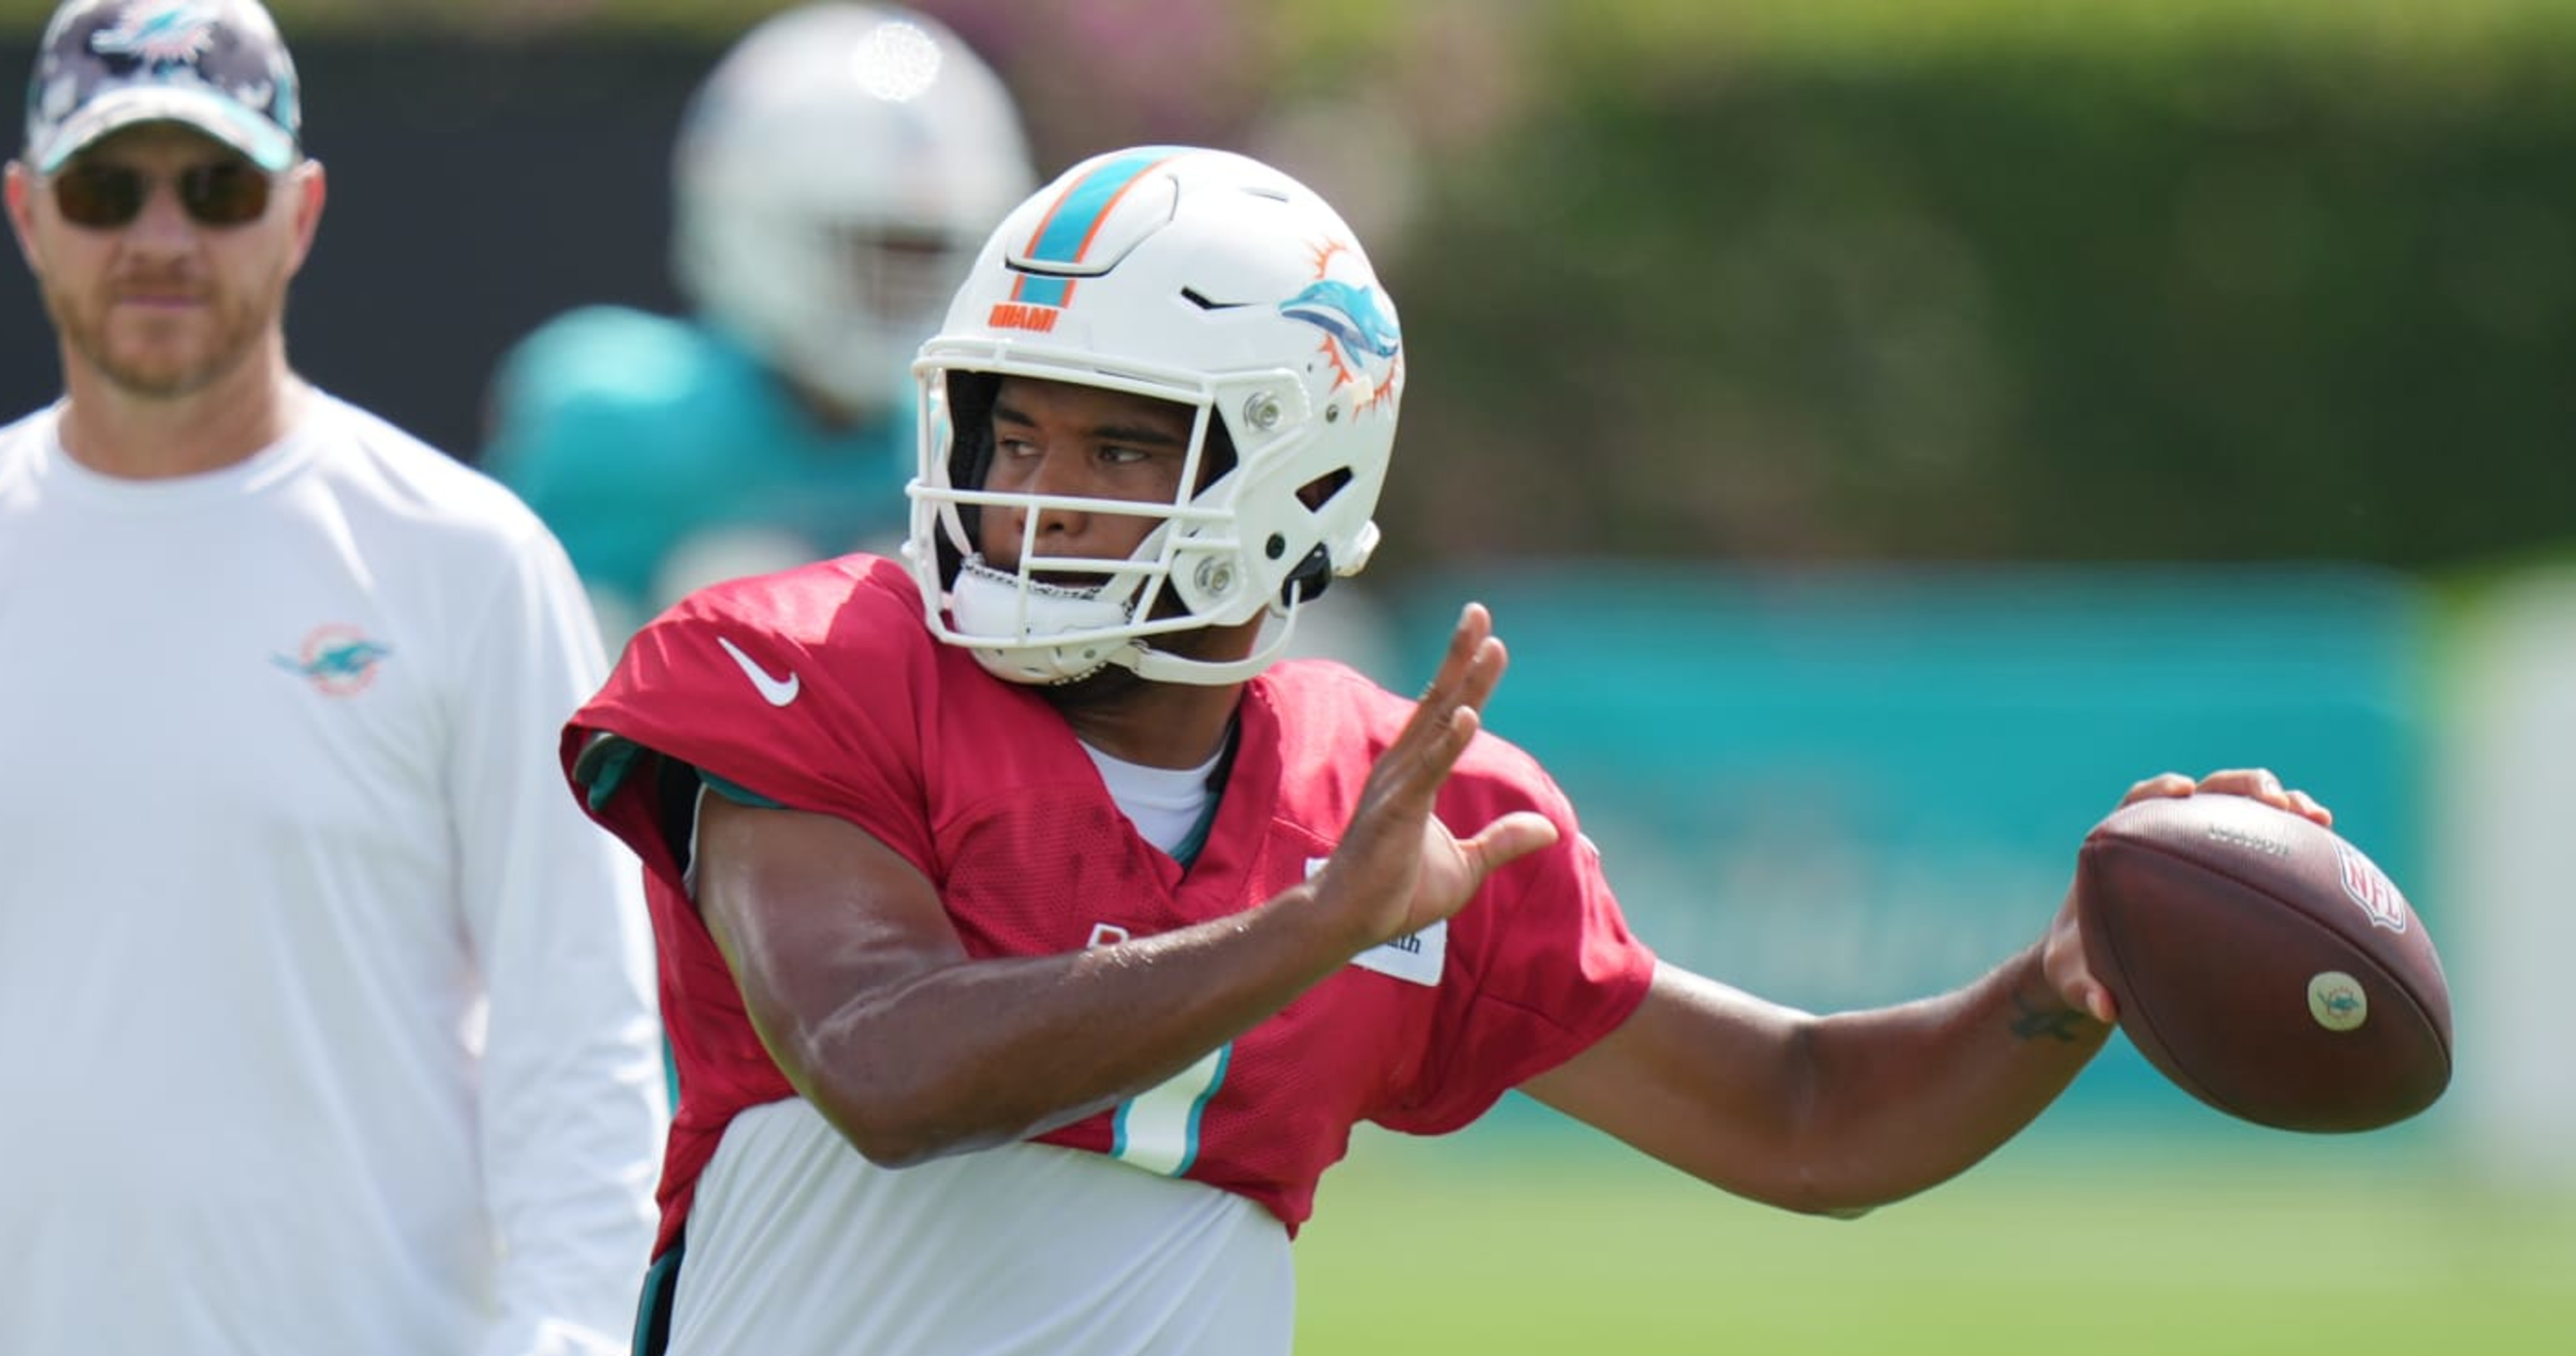 NFL Auction selling first Dolphins jersey signed by Tua Tagovailoa 